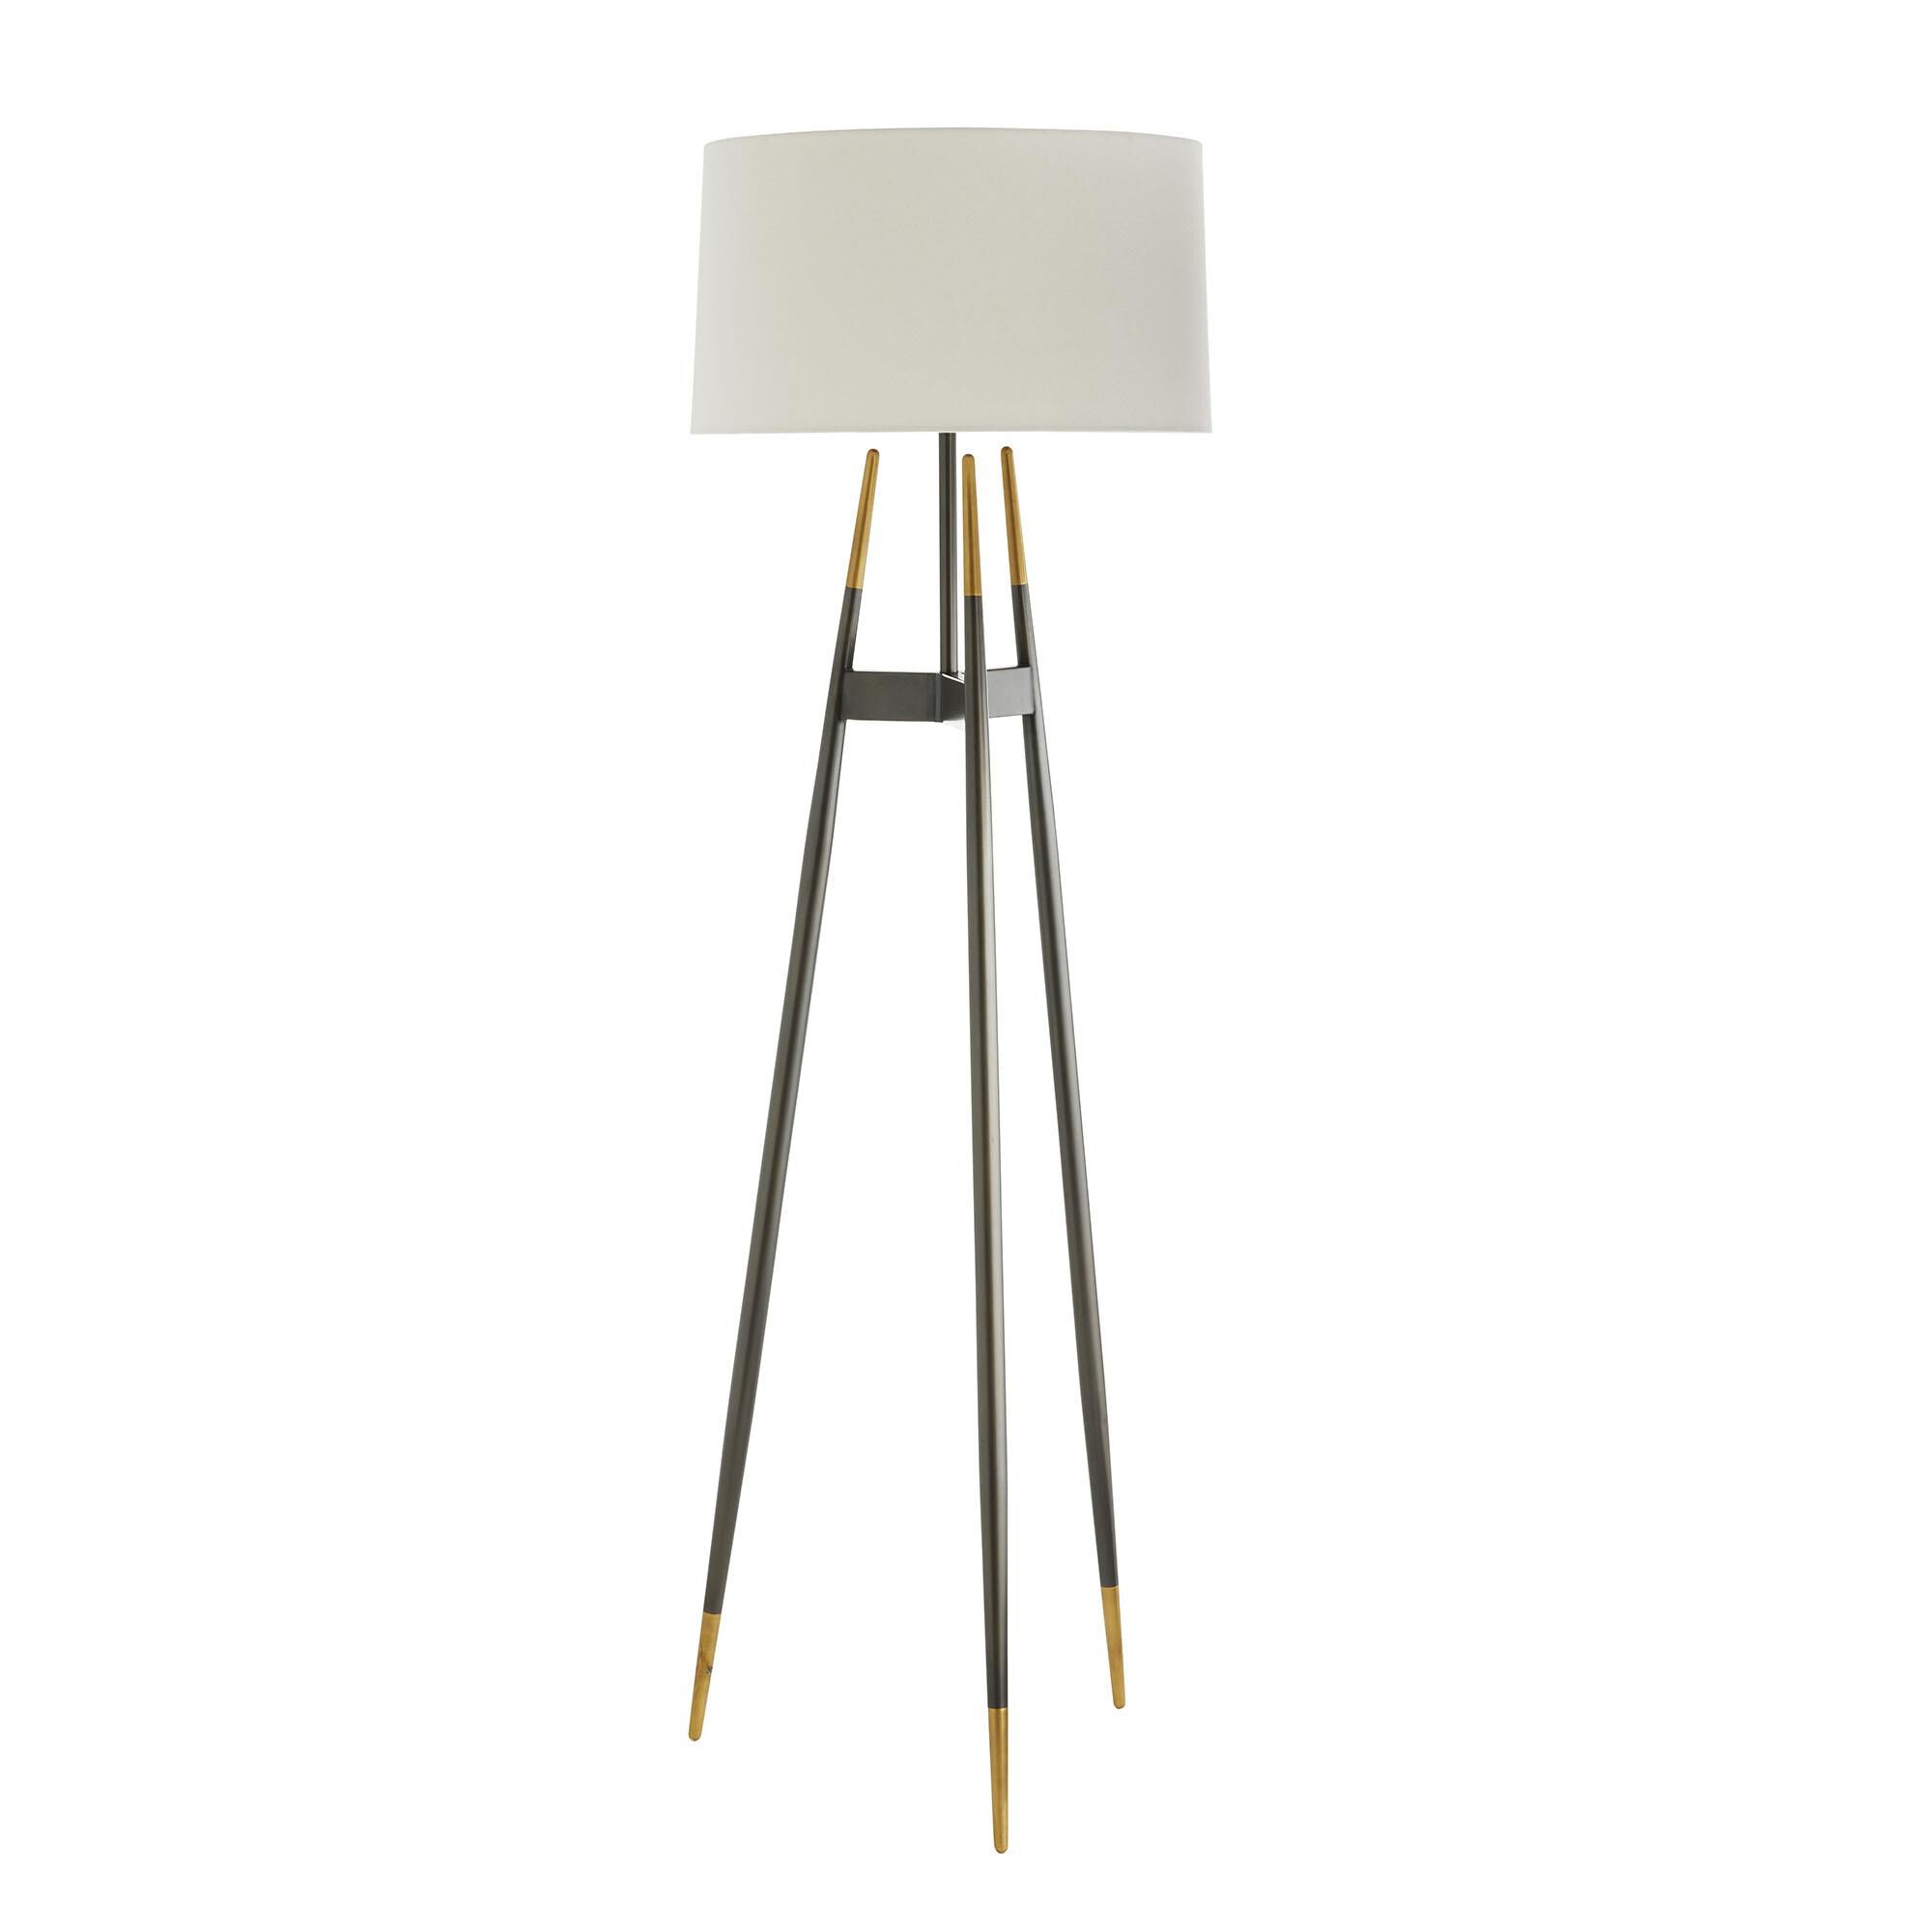 arteriors home lorence 67 inch floor lamp lorence - 79014-498 - transitional